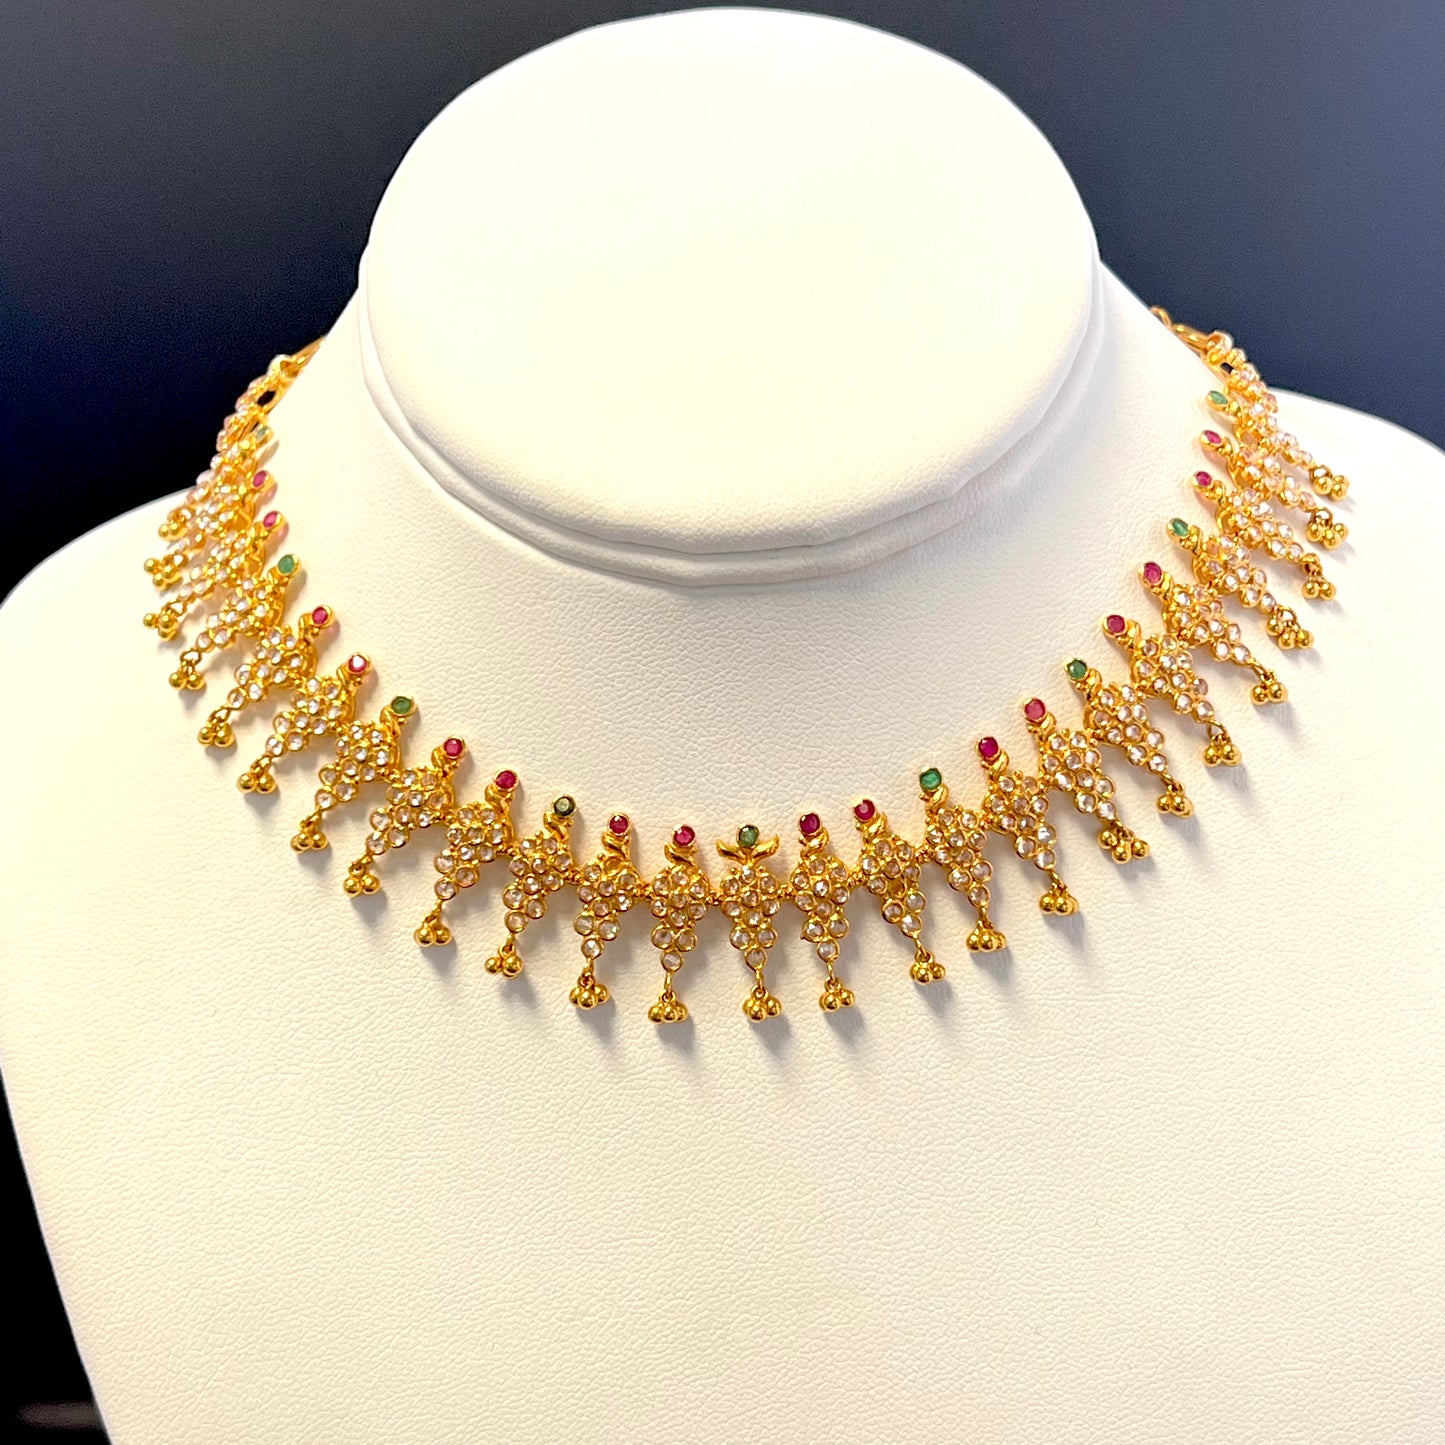 Vibrant Cubic Zarconia & Gold Choker Set with Faint Emeralds and Rubies